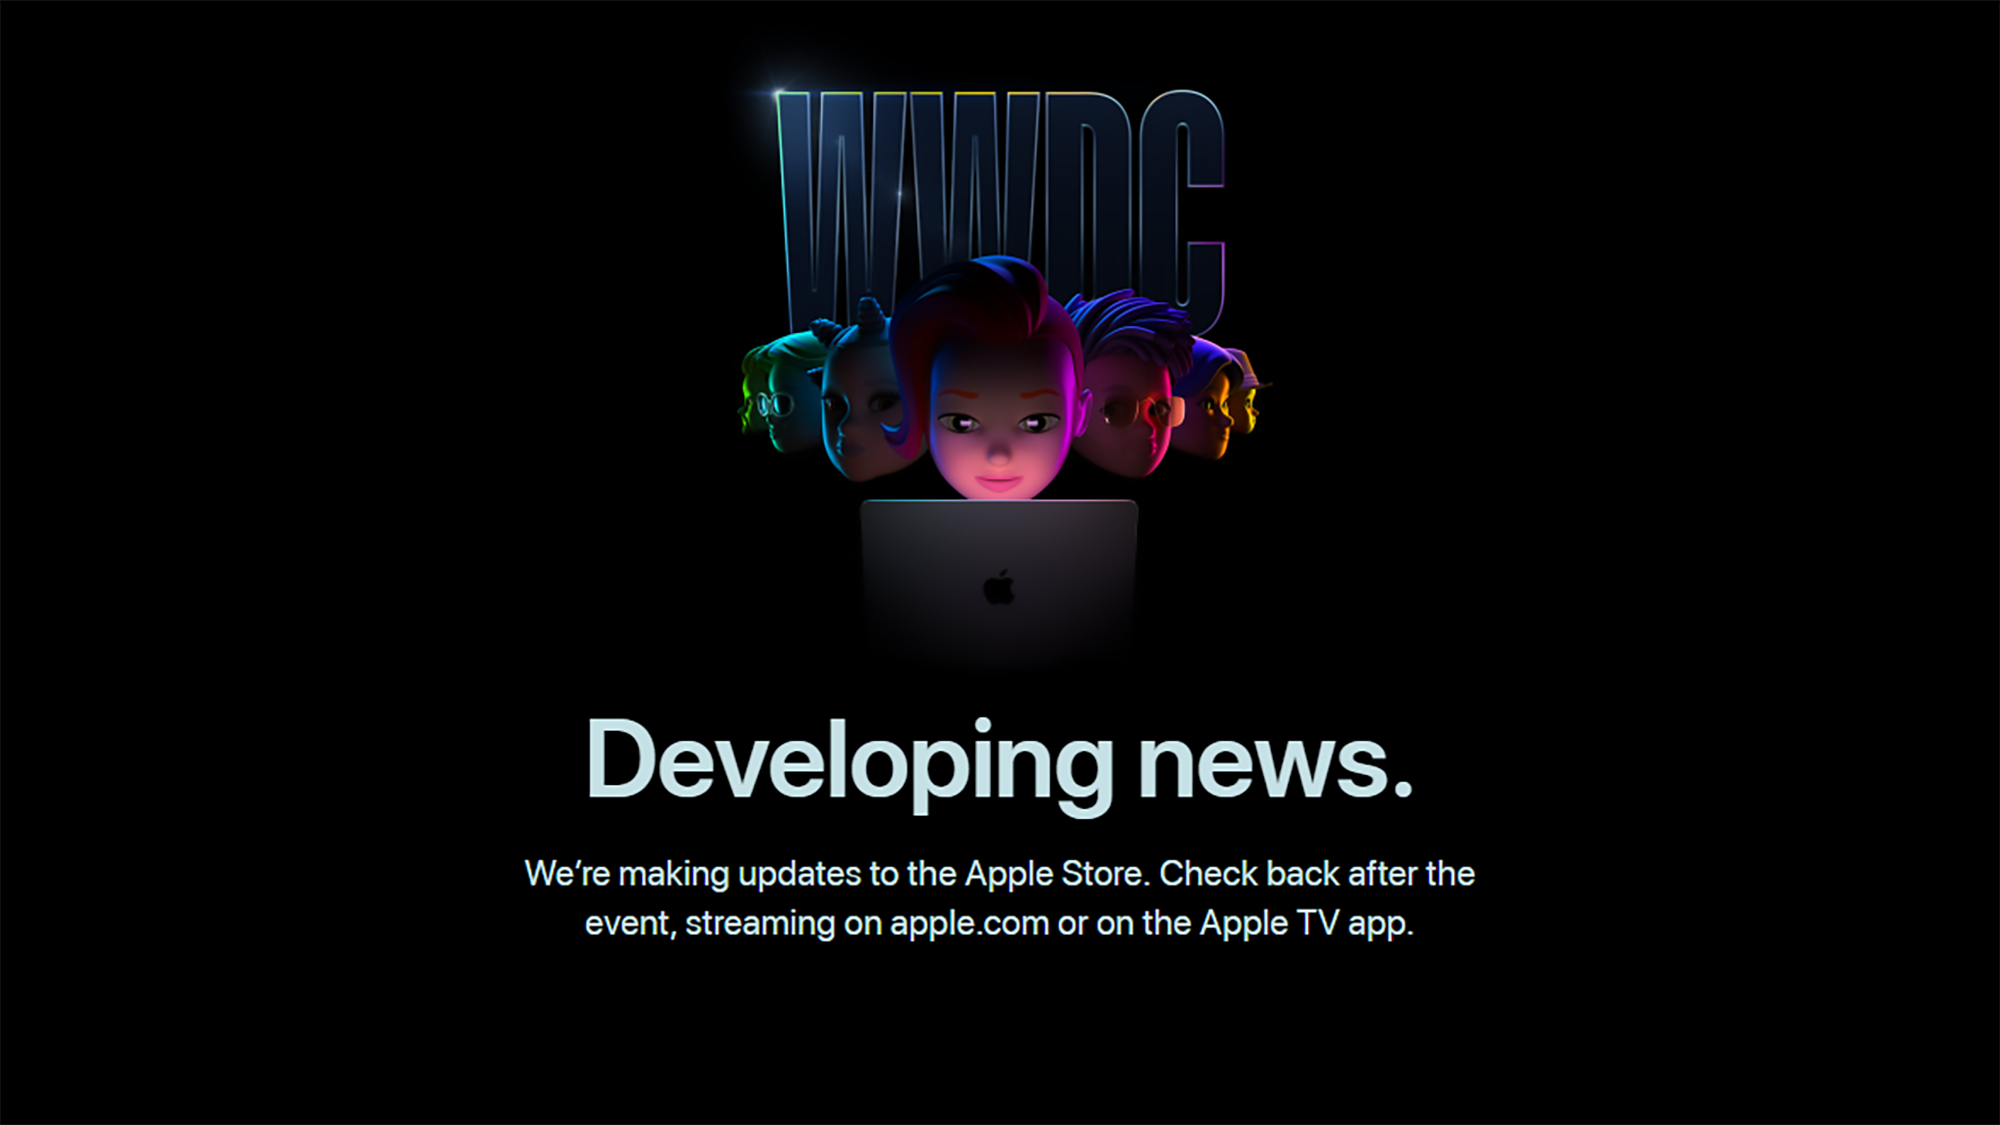 The apple store placeholder with animated heads on a black background looking at a Macbook